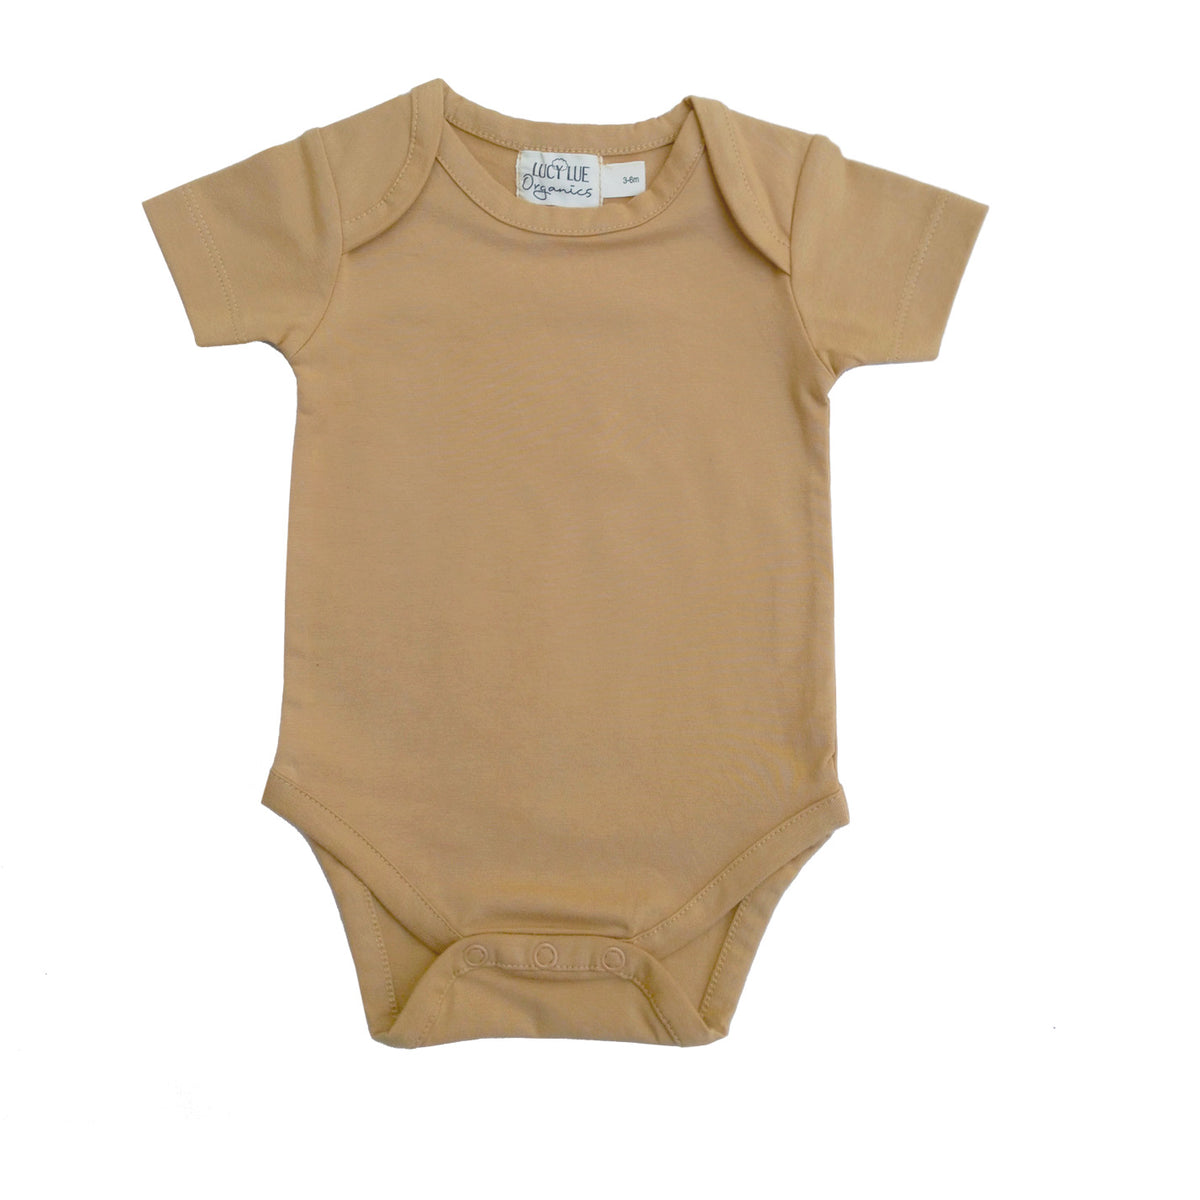 Lucy Lue Organics short sleeve baby bodysuit. Organic newborn clothes. Baby clothing. Gender neutral newborn clothes. Baby romper. Organic baby bodysuits. modern organic baby clothes. newborn clothes. sustainable baby clothes.  Soft baby clothes. solid color baby clothes